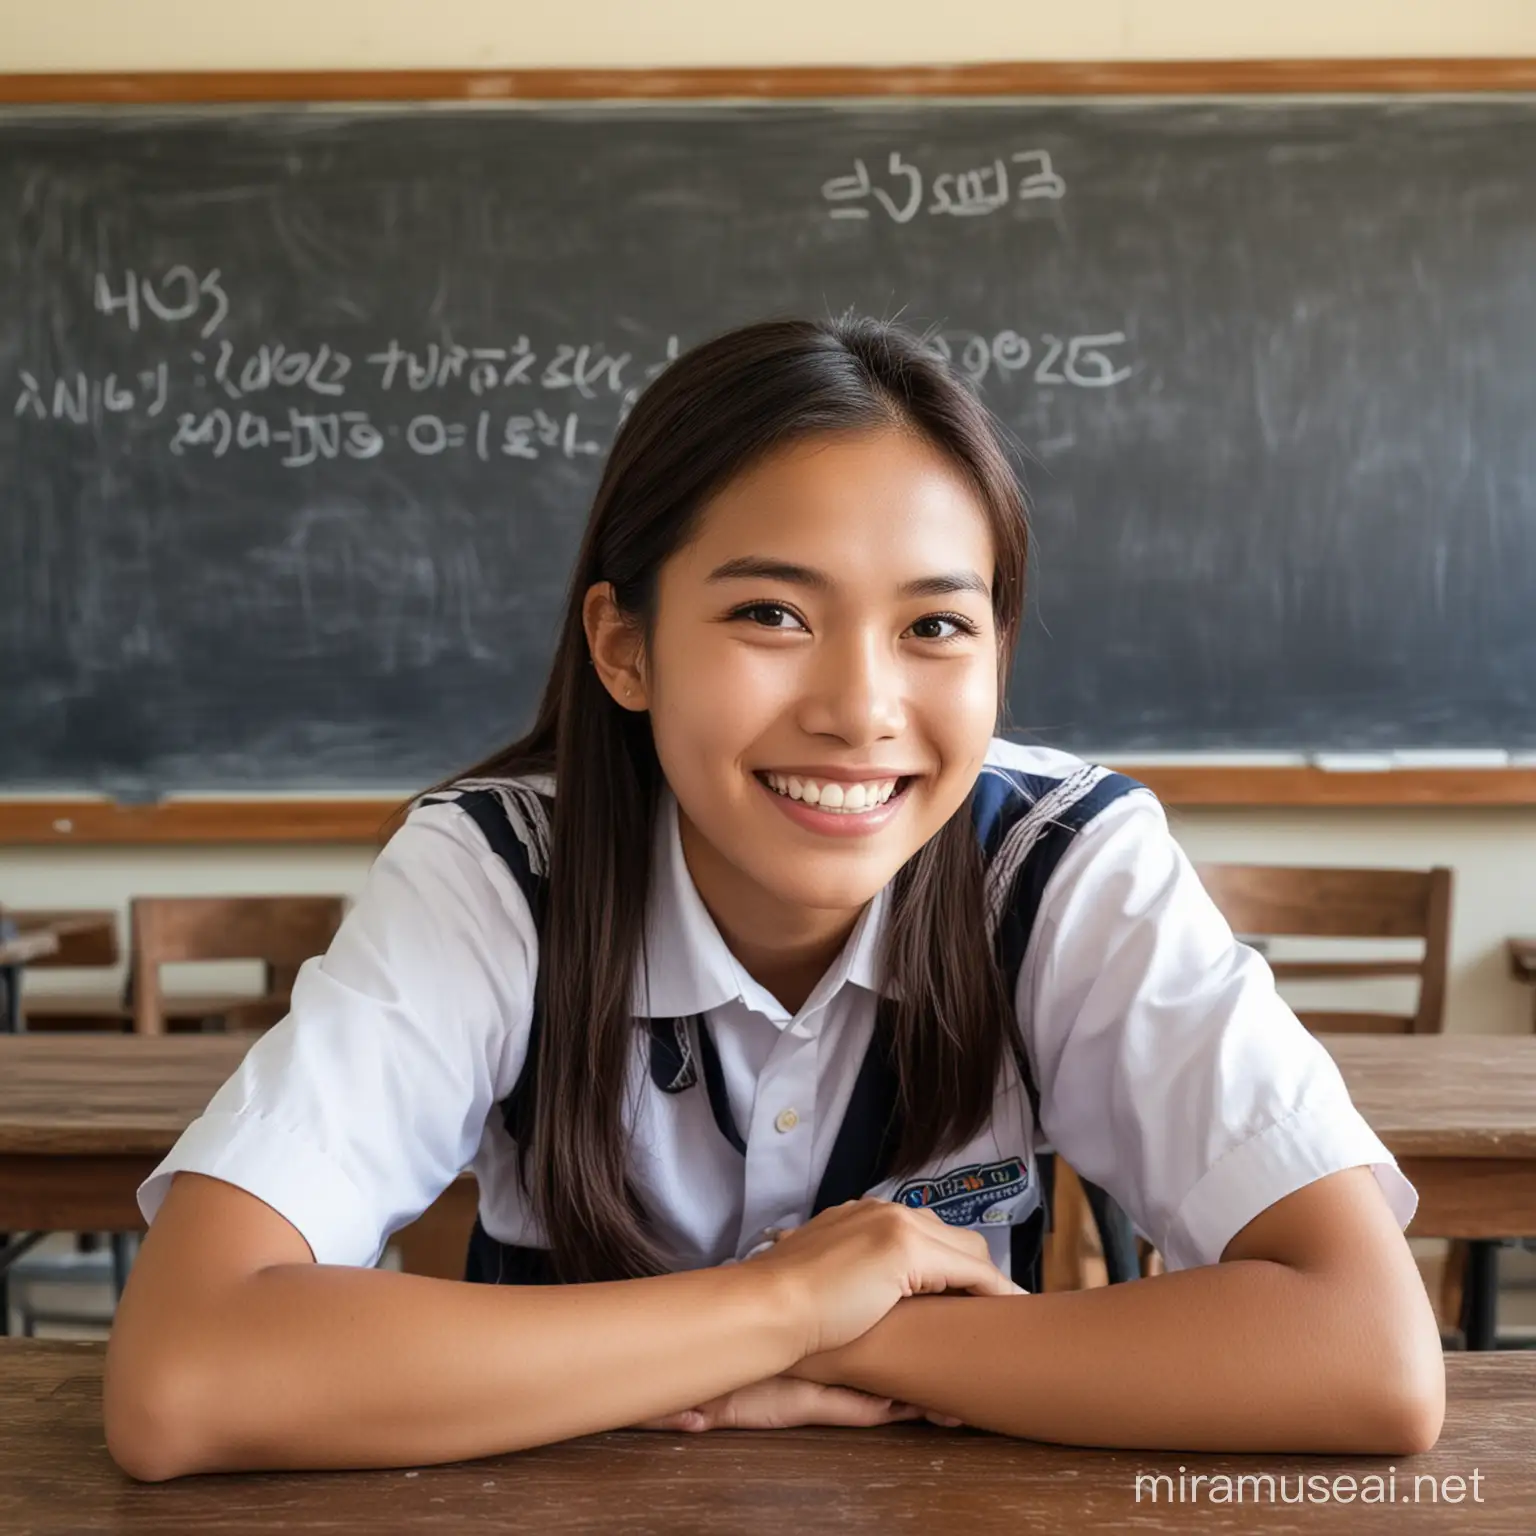 Thai High School Girl Student Smiling at Study Table in Classroom